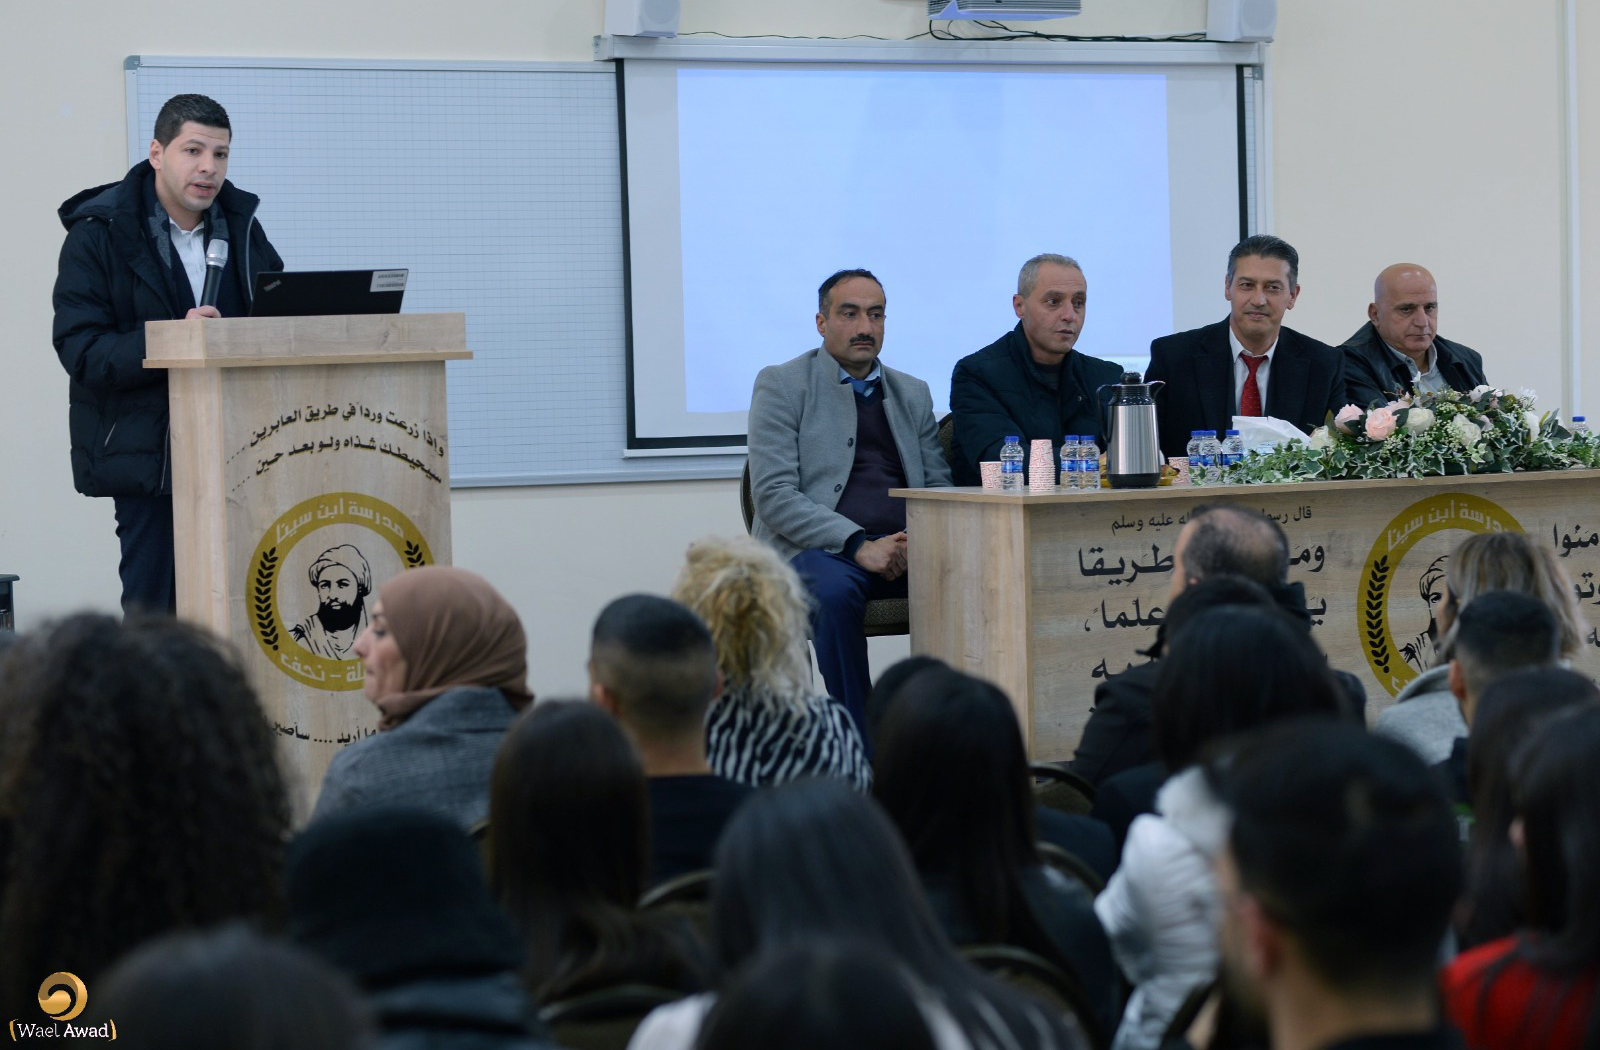 AAUP Visits the Nahf Local Council and Organizes an Open Day for a Number of Schools in the Palestinian Occupied Lands 